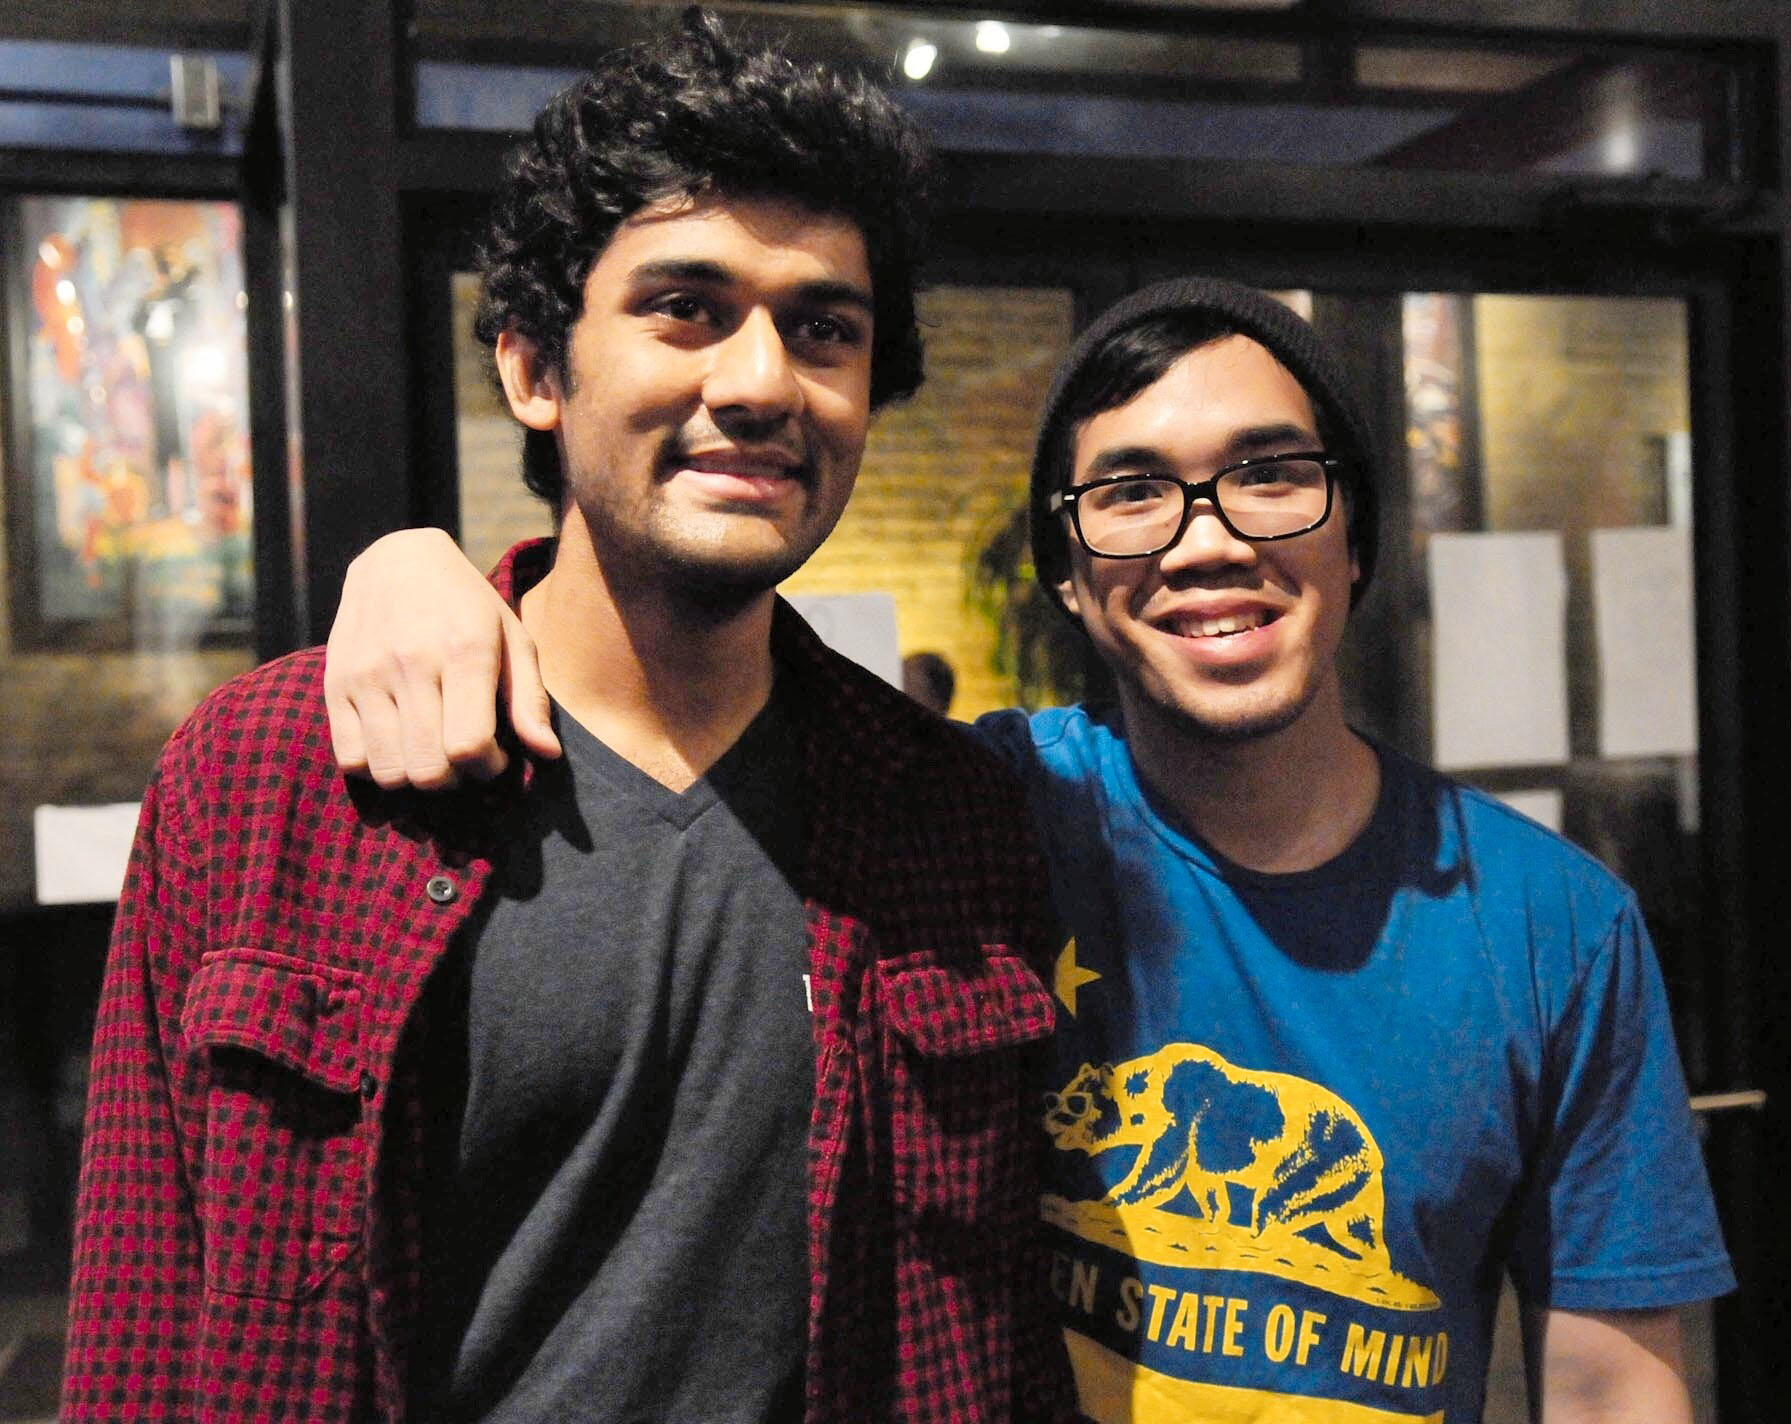 Ashutosh Priyadarshy and Duylam Nguyen-Ngo stand next to each other smiling at the camera